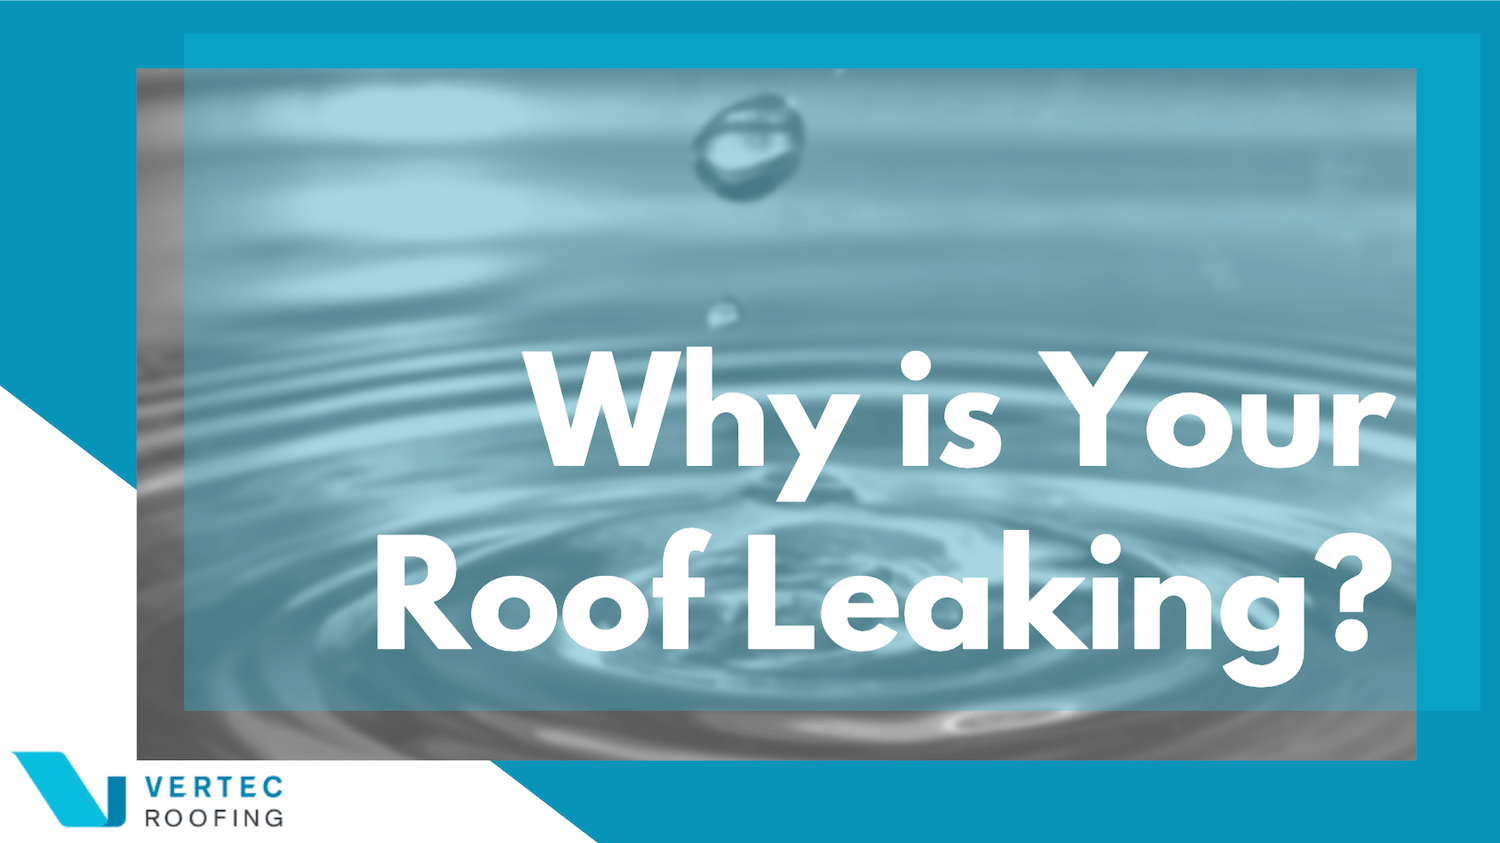 Why is your Roof Leaking?